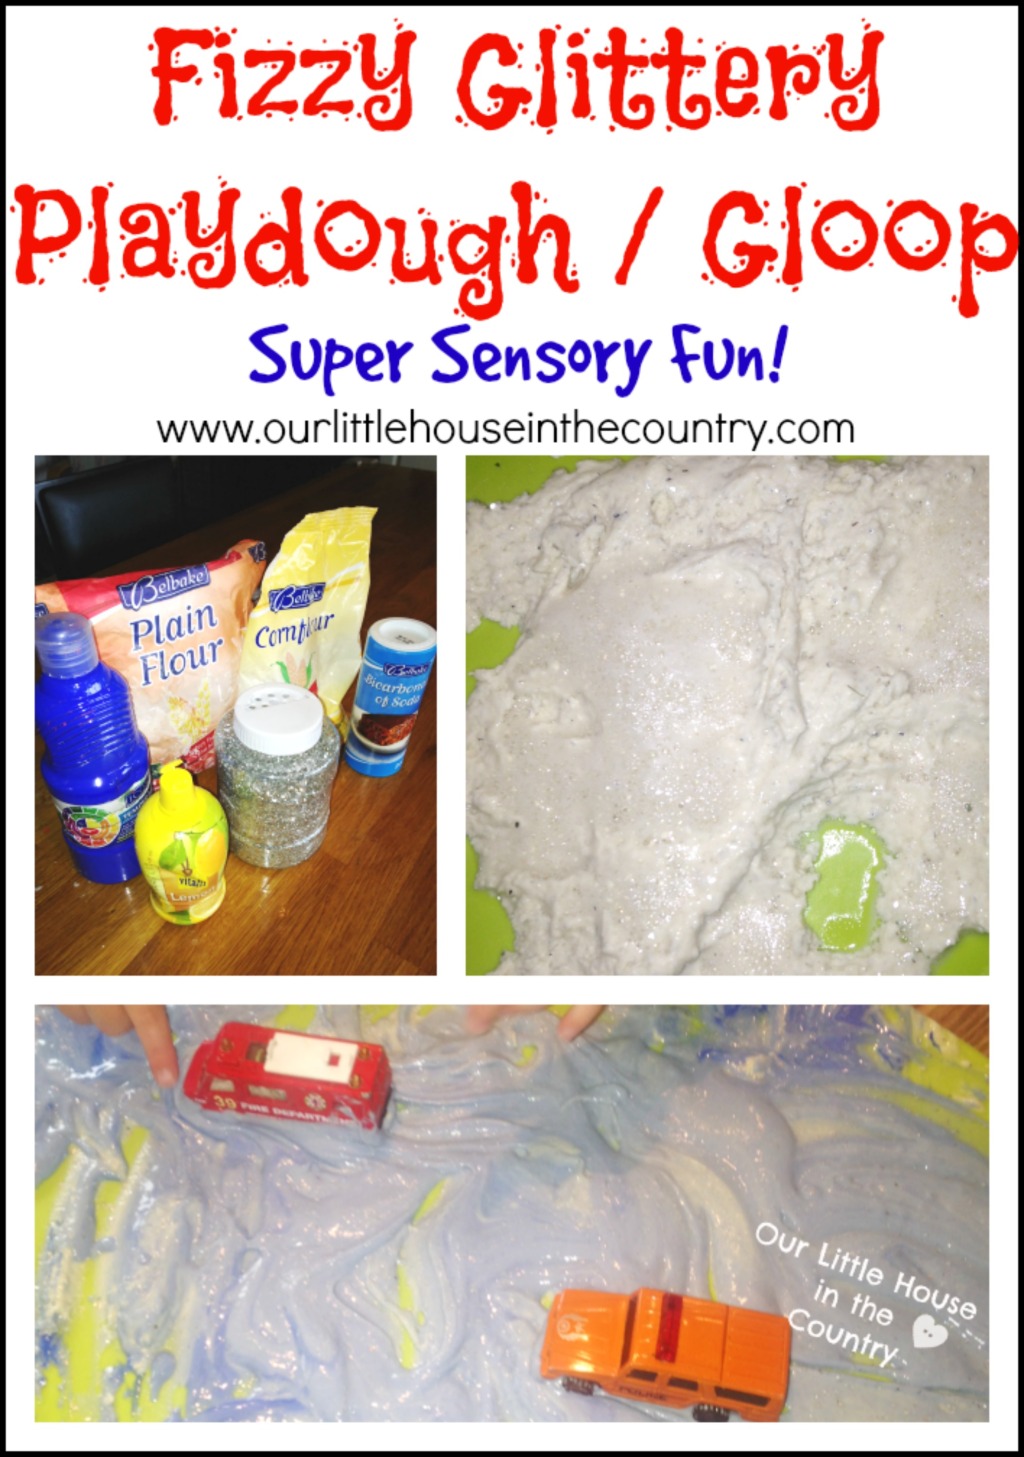 Fizzy Glittery Playdough / Gloop - Super Sensory Fun - Our Little House in the Country #playdough #sensoryplay #gloop #messyplay